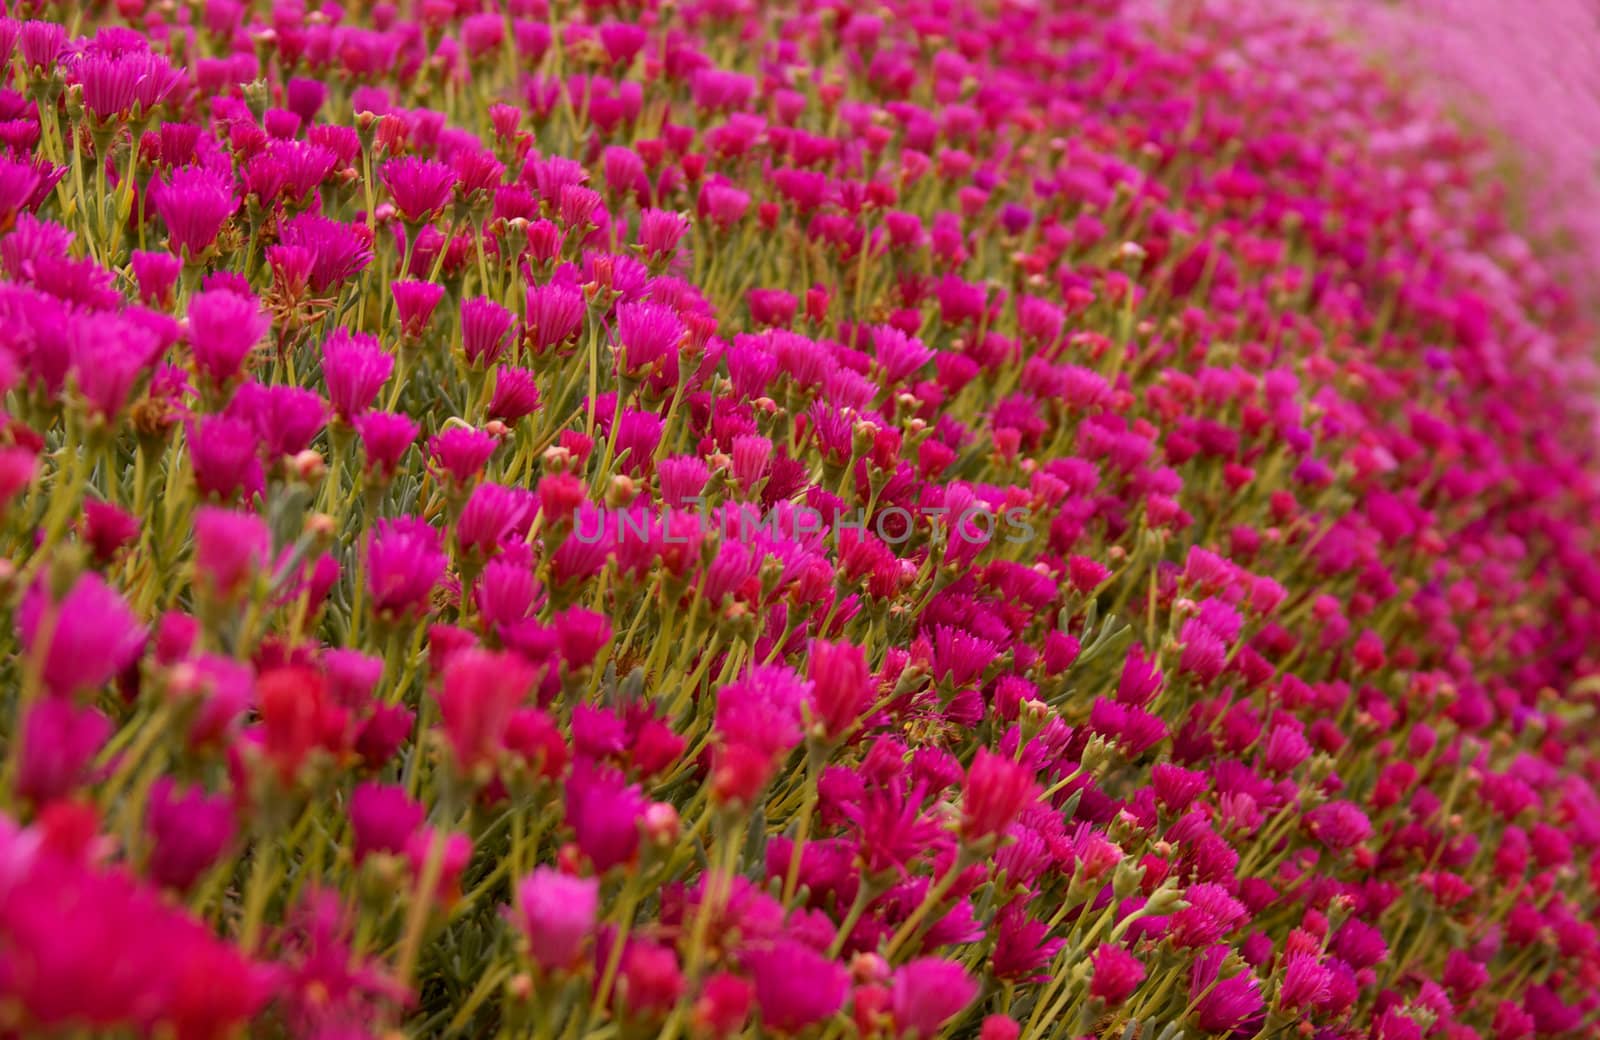 Bed of red and pink flowers forever by bobkeenan